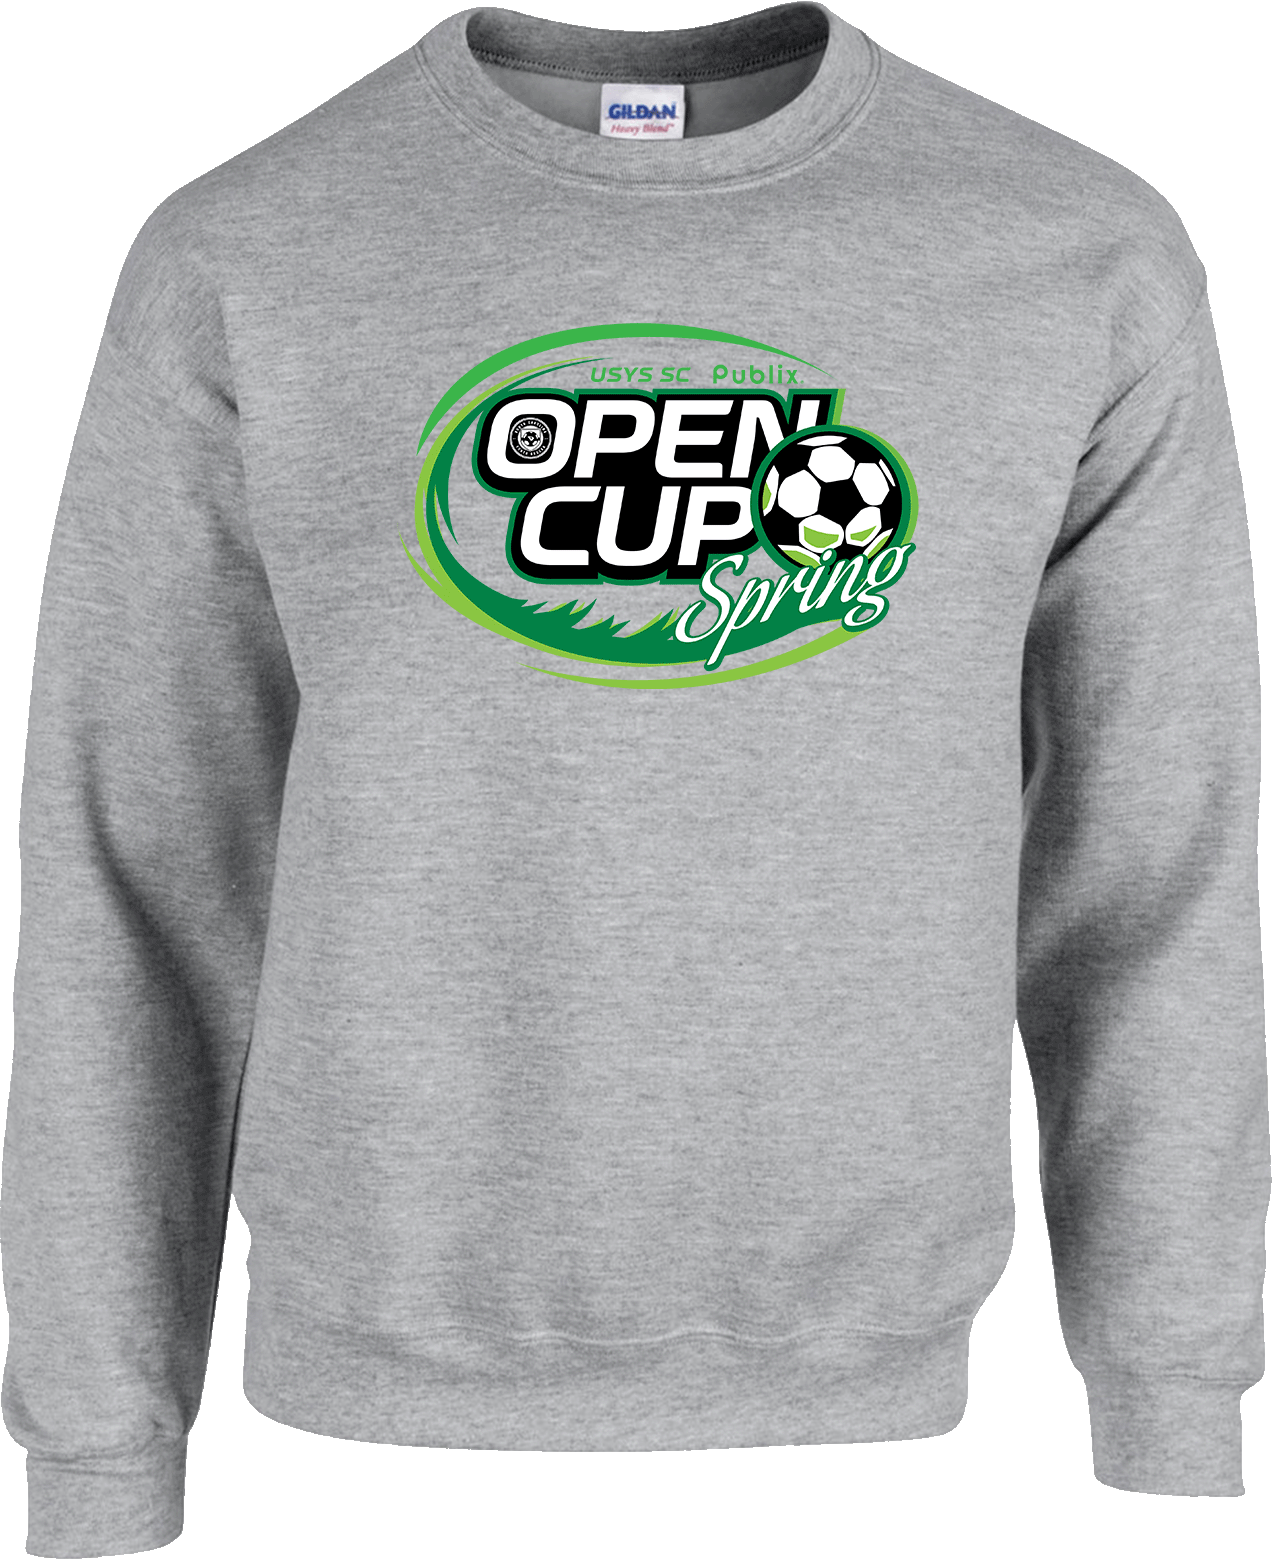 Crew Sweatershirt - 2024 USYS SC Publix Open Cup Spring